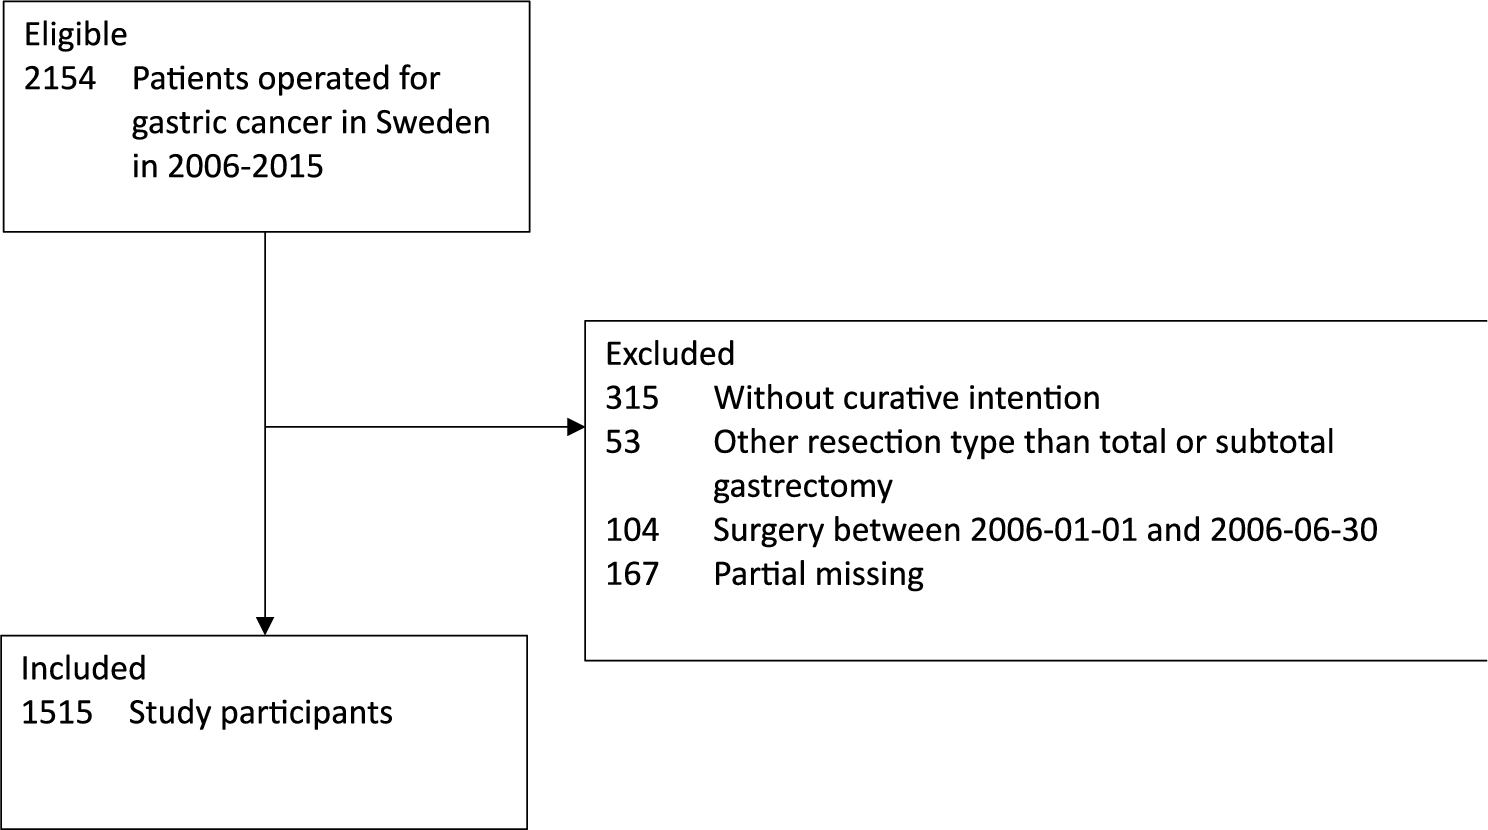 Statin use in relation to long-term survival after gastrectomy for gastric adenocarcinoma: a Swedish population-based cohort study